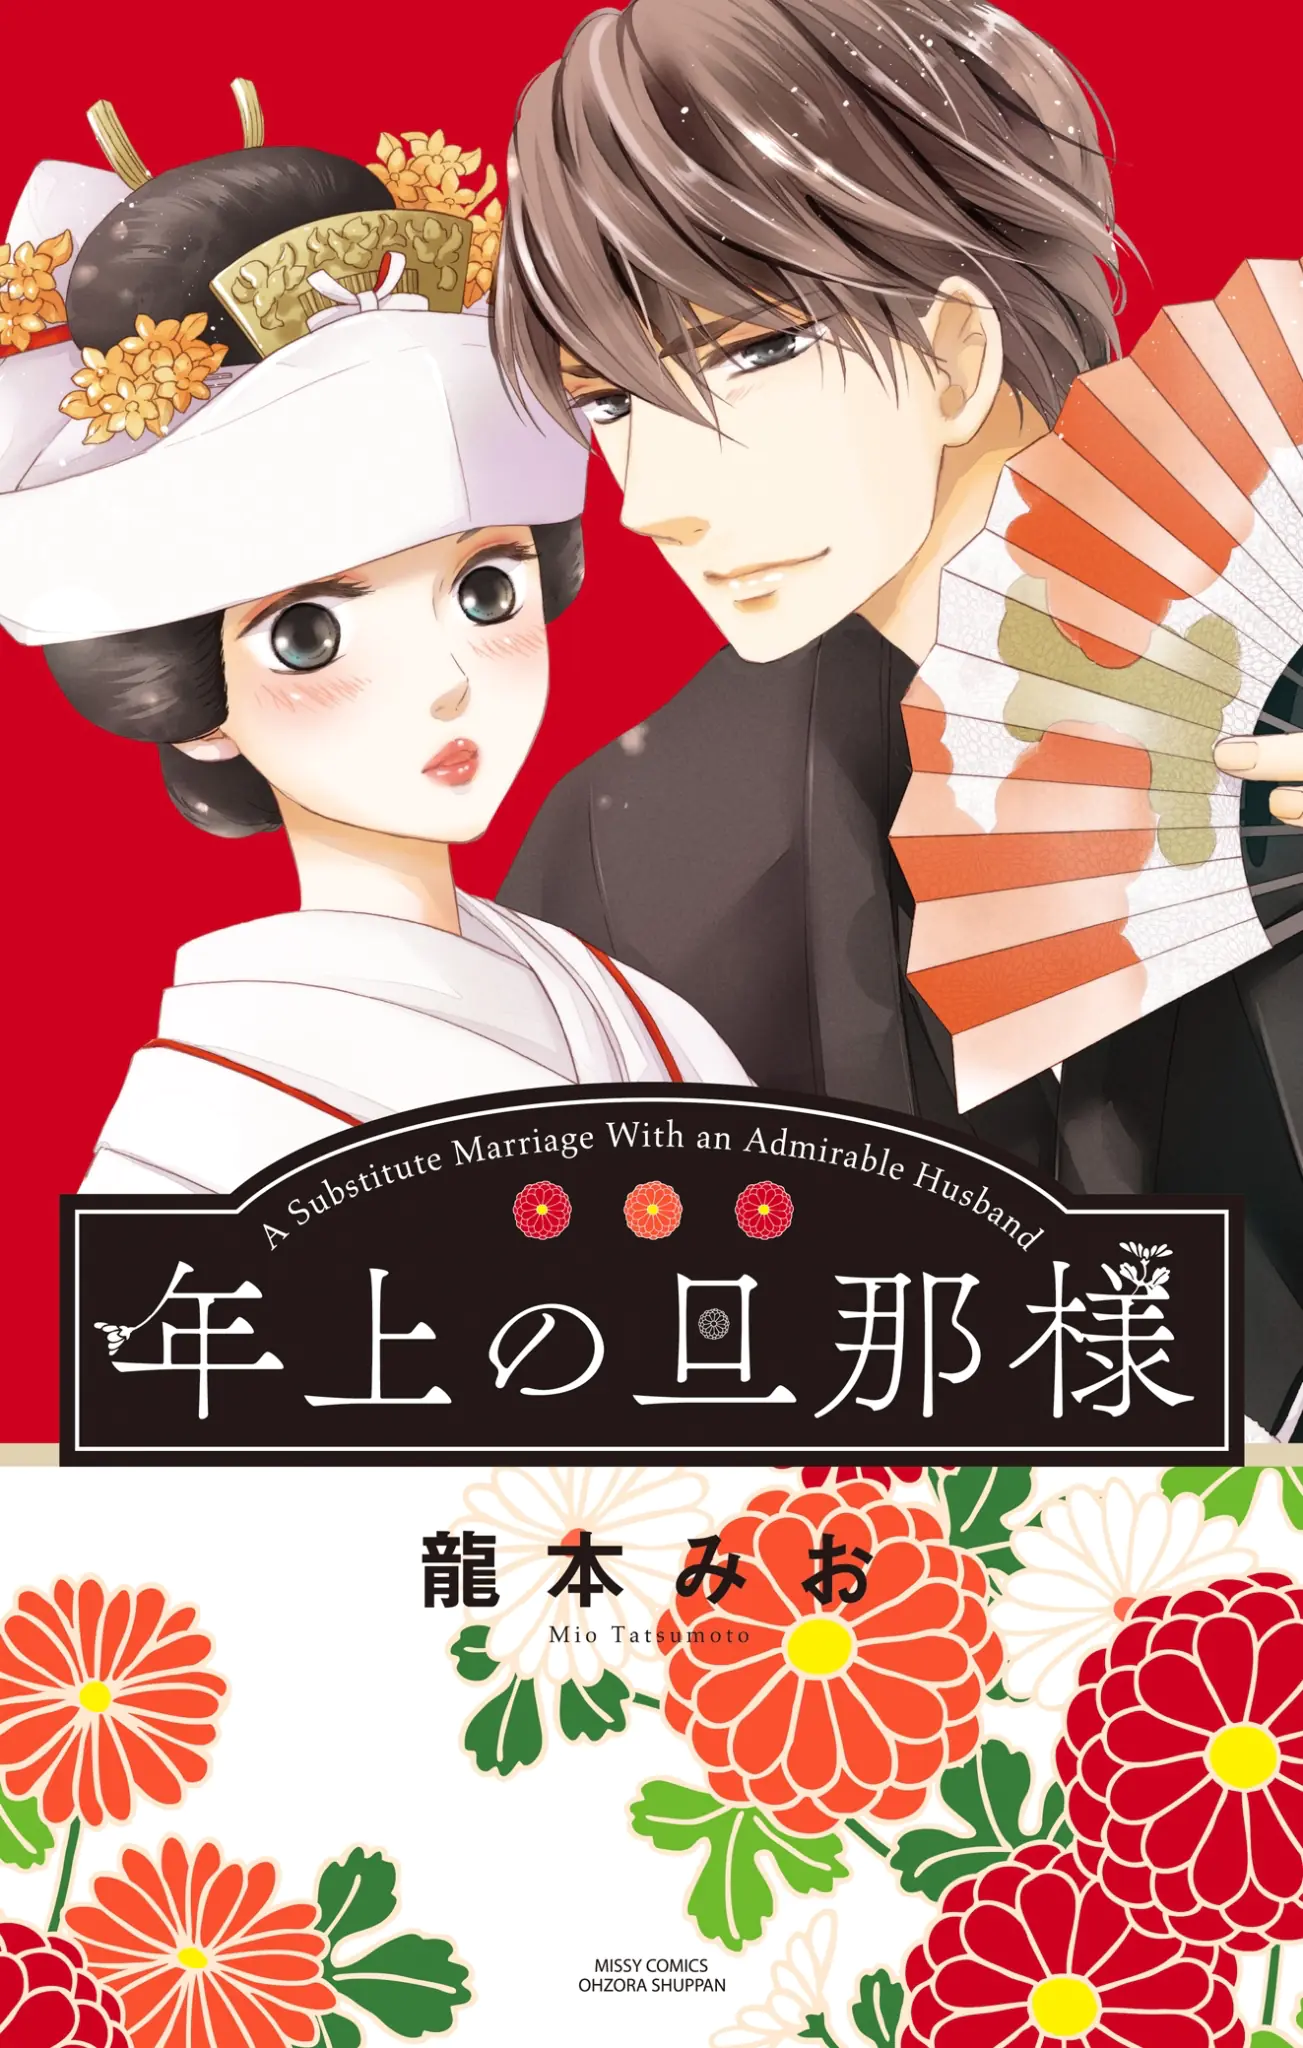 Manga Planet & futekiya merge — available title: A Substitute Marriage With an Admirable Husband